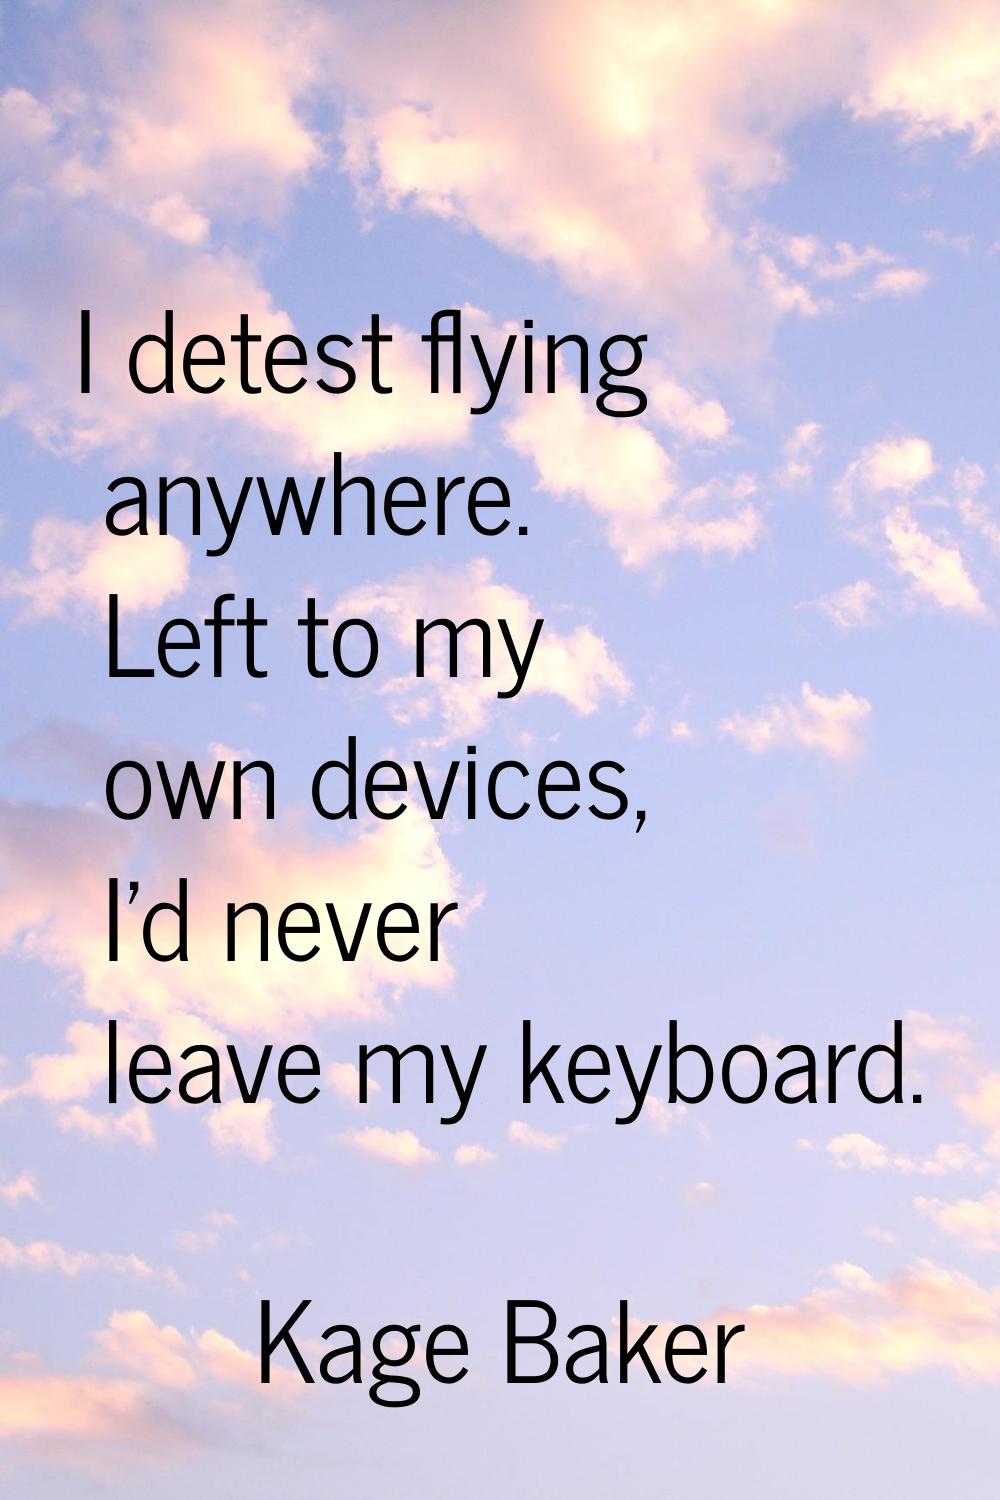 I detest flying anywhere. Left to my own devices, I'd never leave my keyboard.